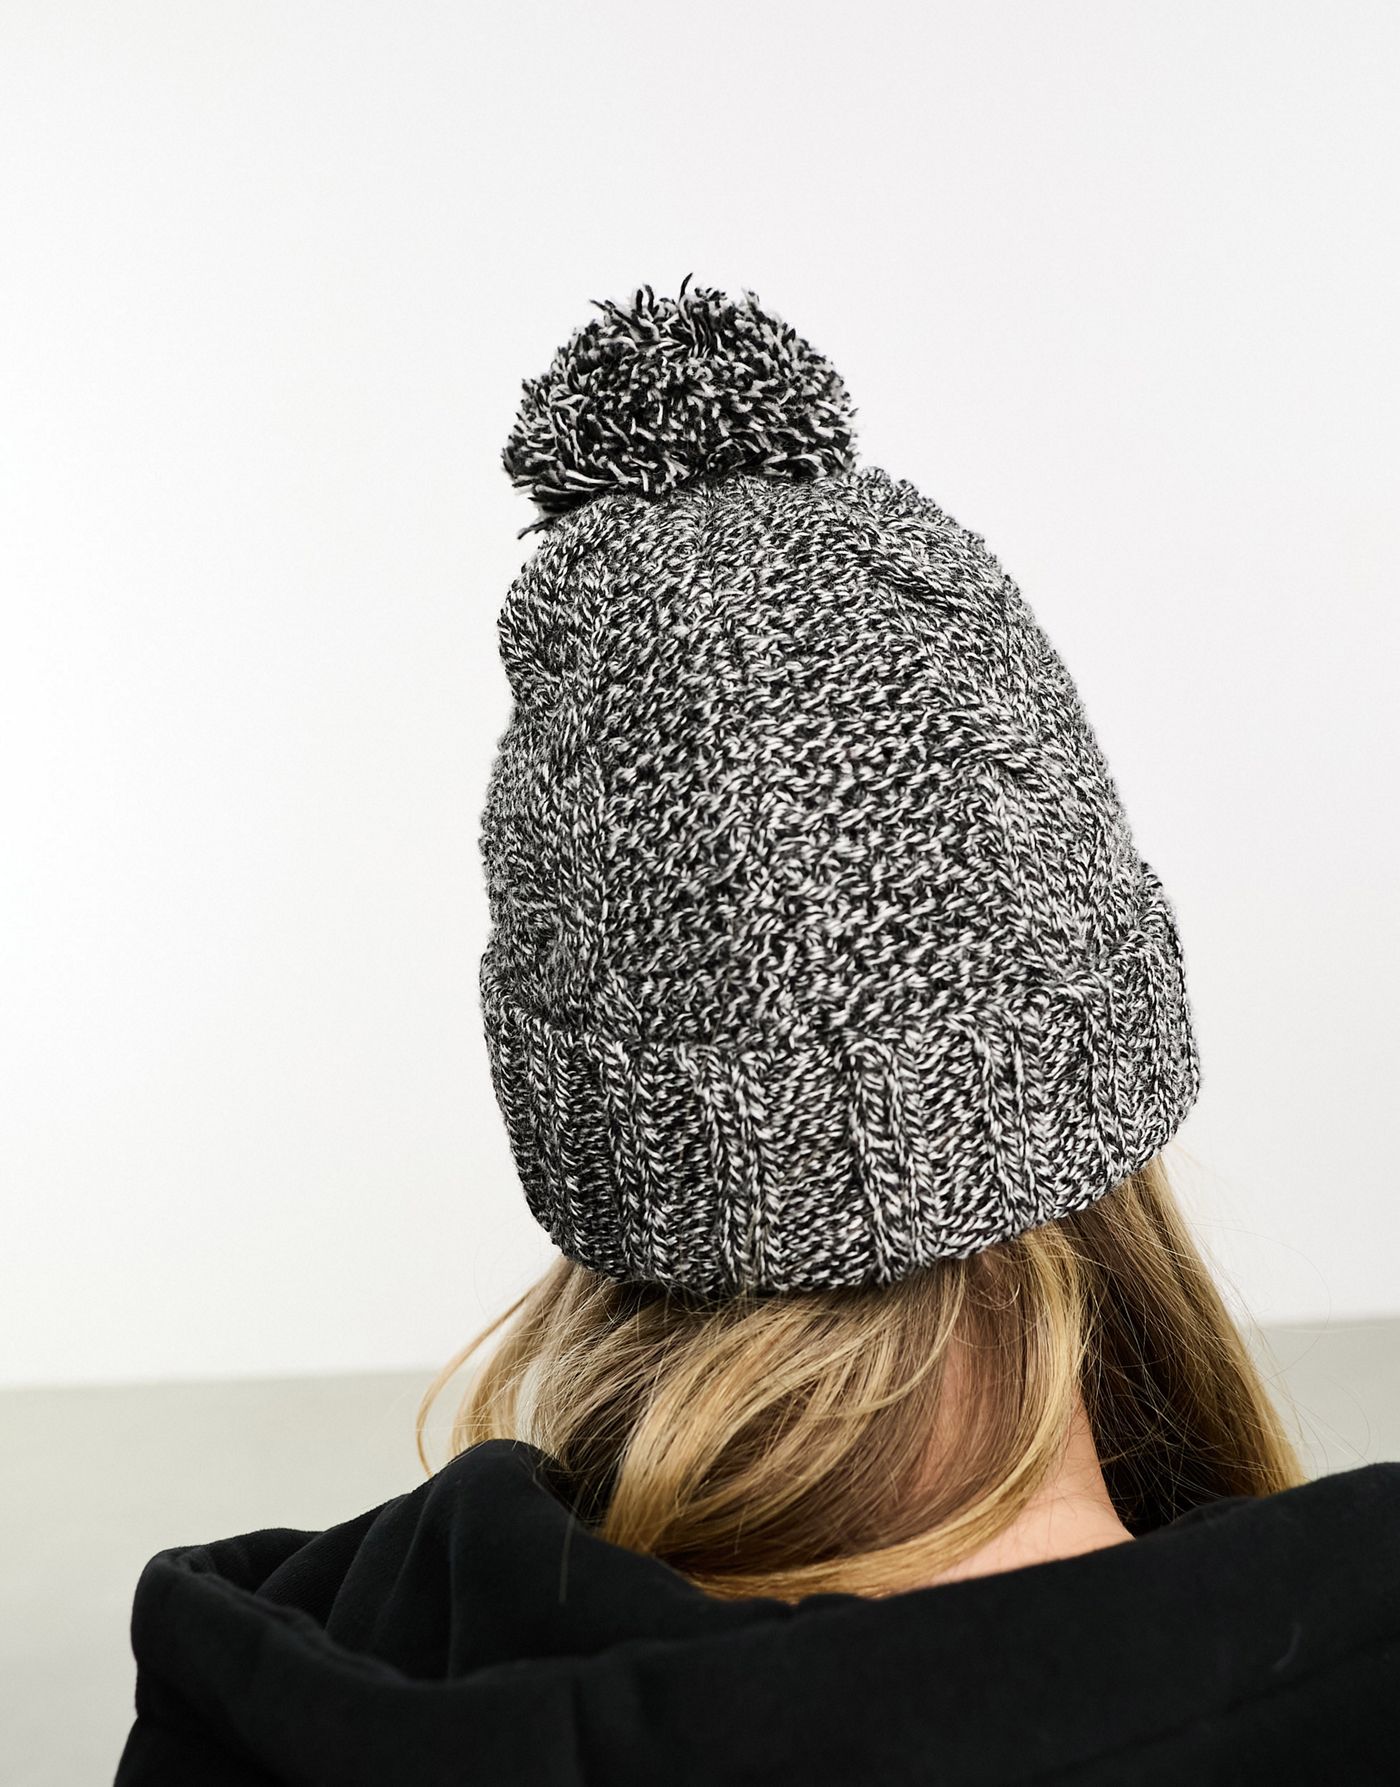 Superdry cable knit beanie hat in Black Fleck